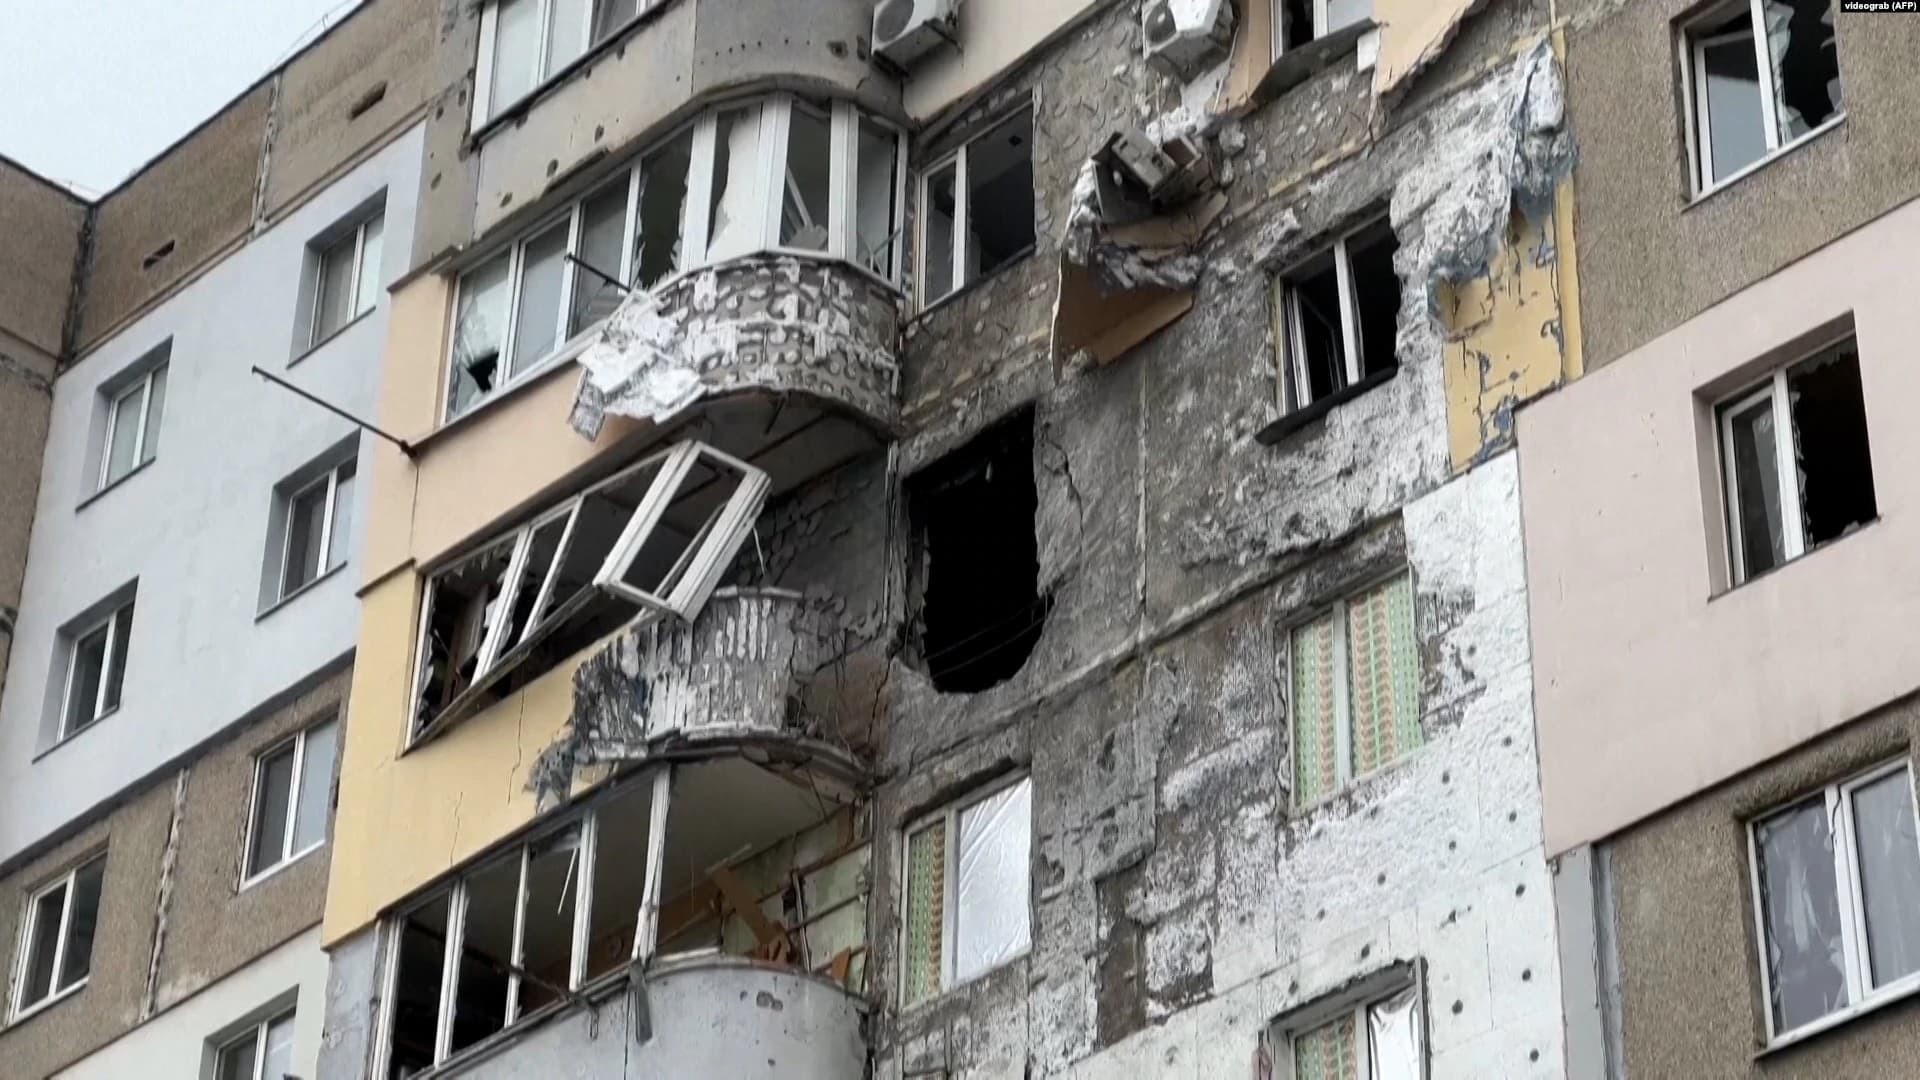 A building in Kherson after being shelled by Russian forces